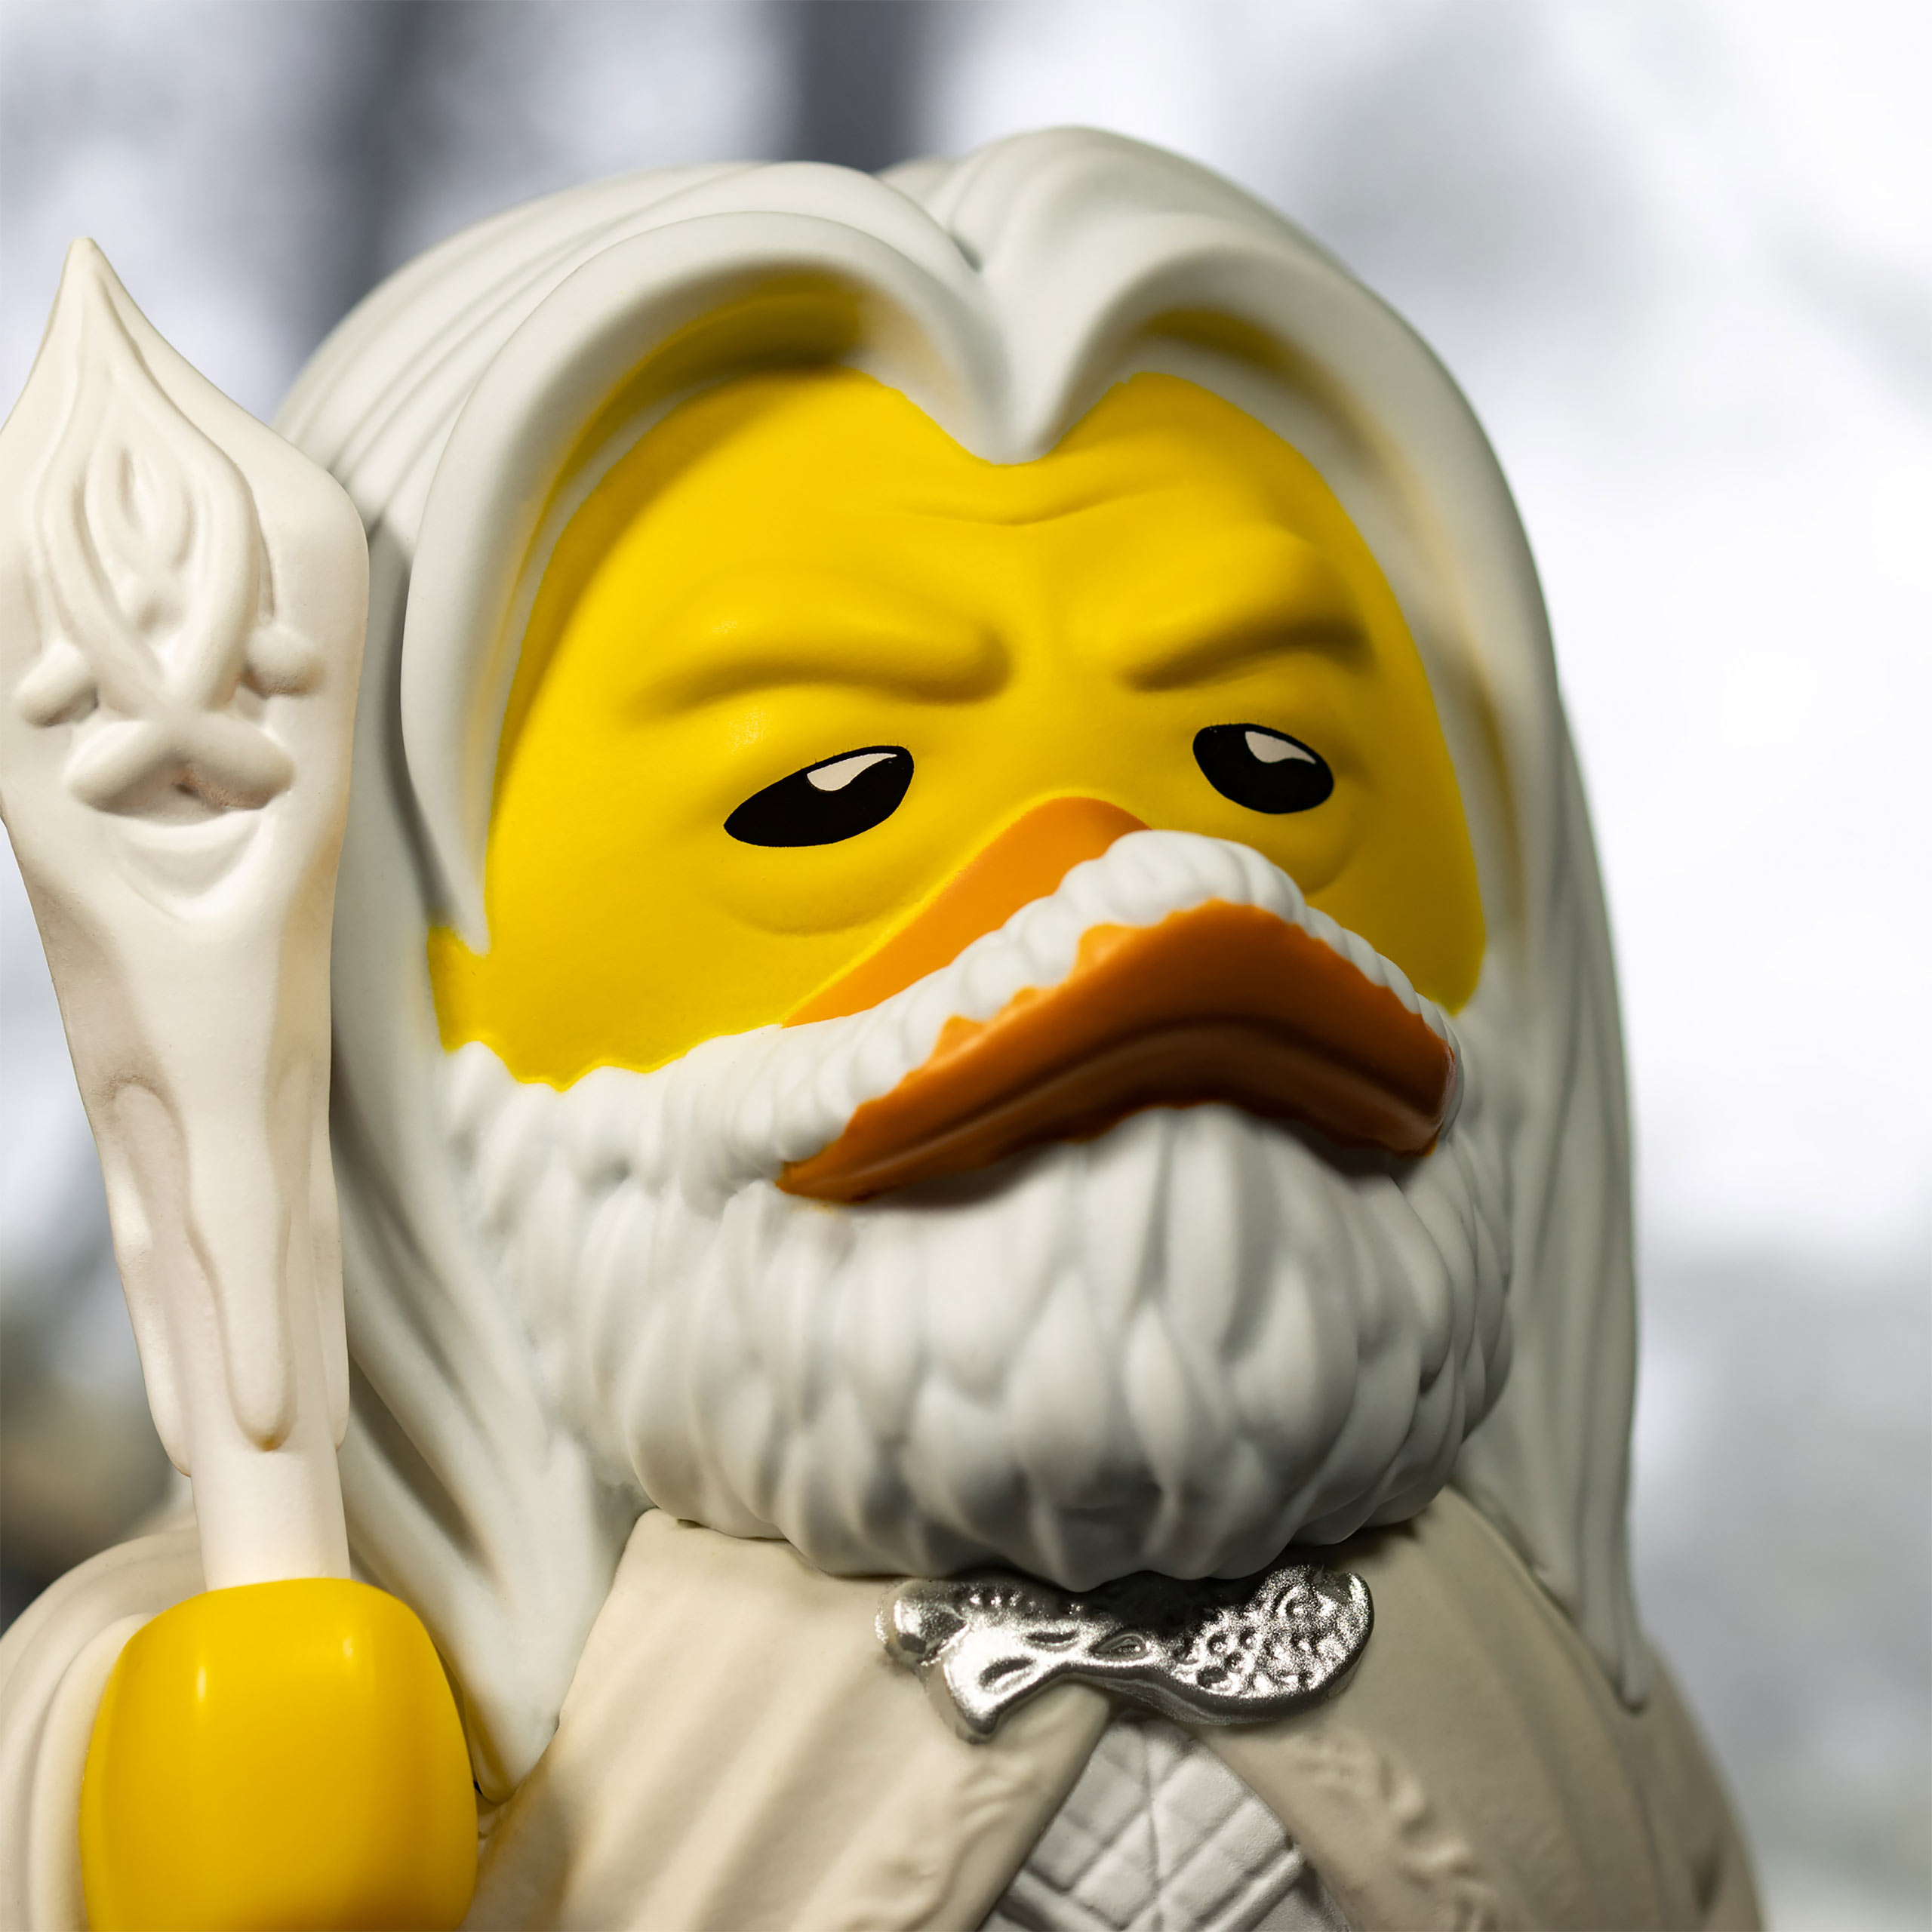 Lord of the Rings - Gandalf the White TUBBZ Decorative Duck